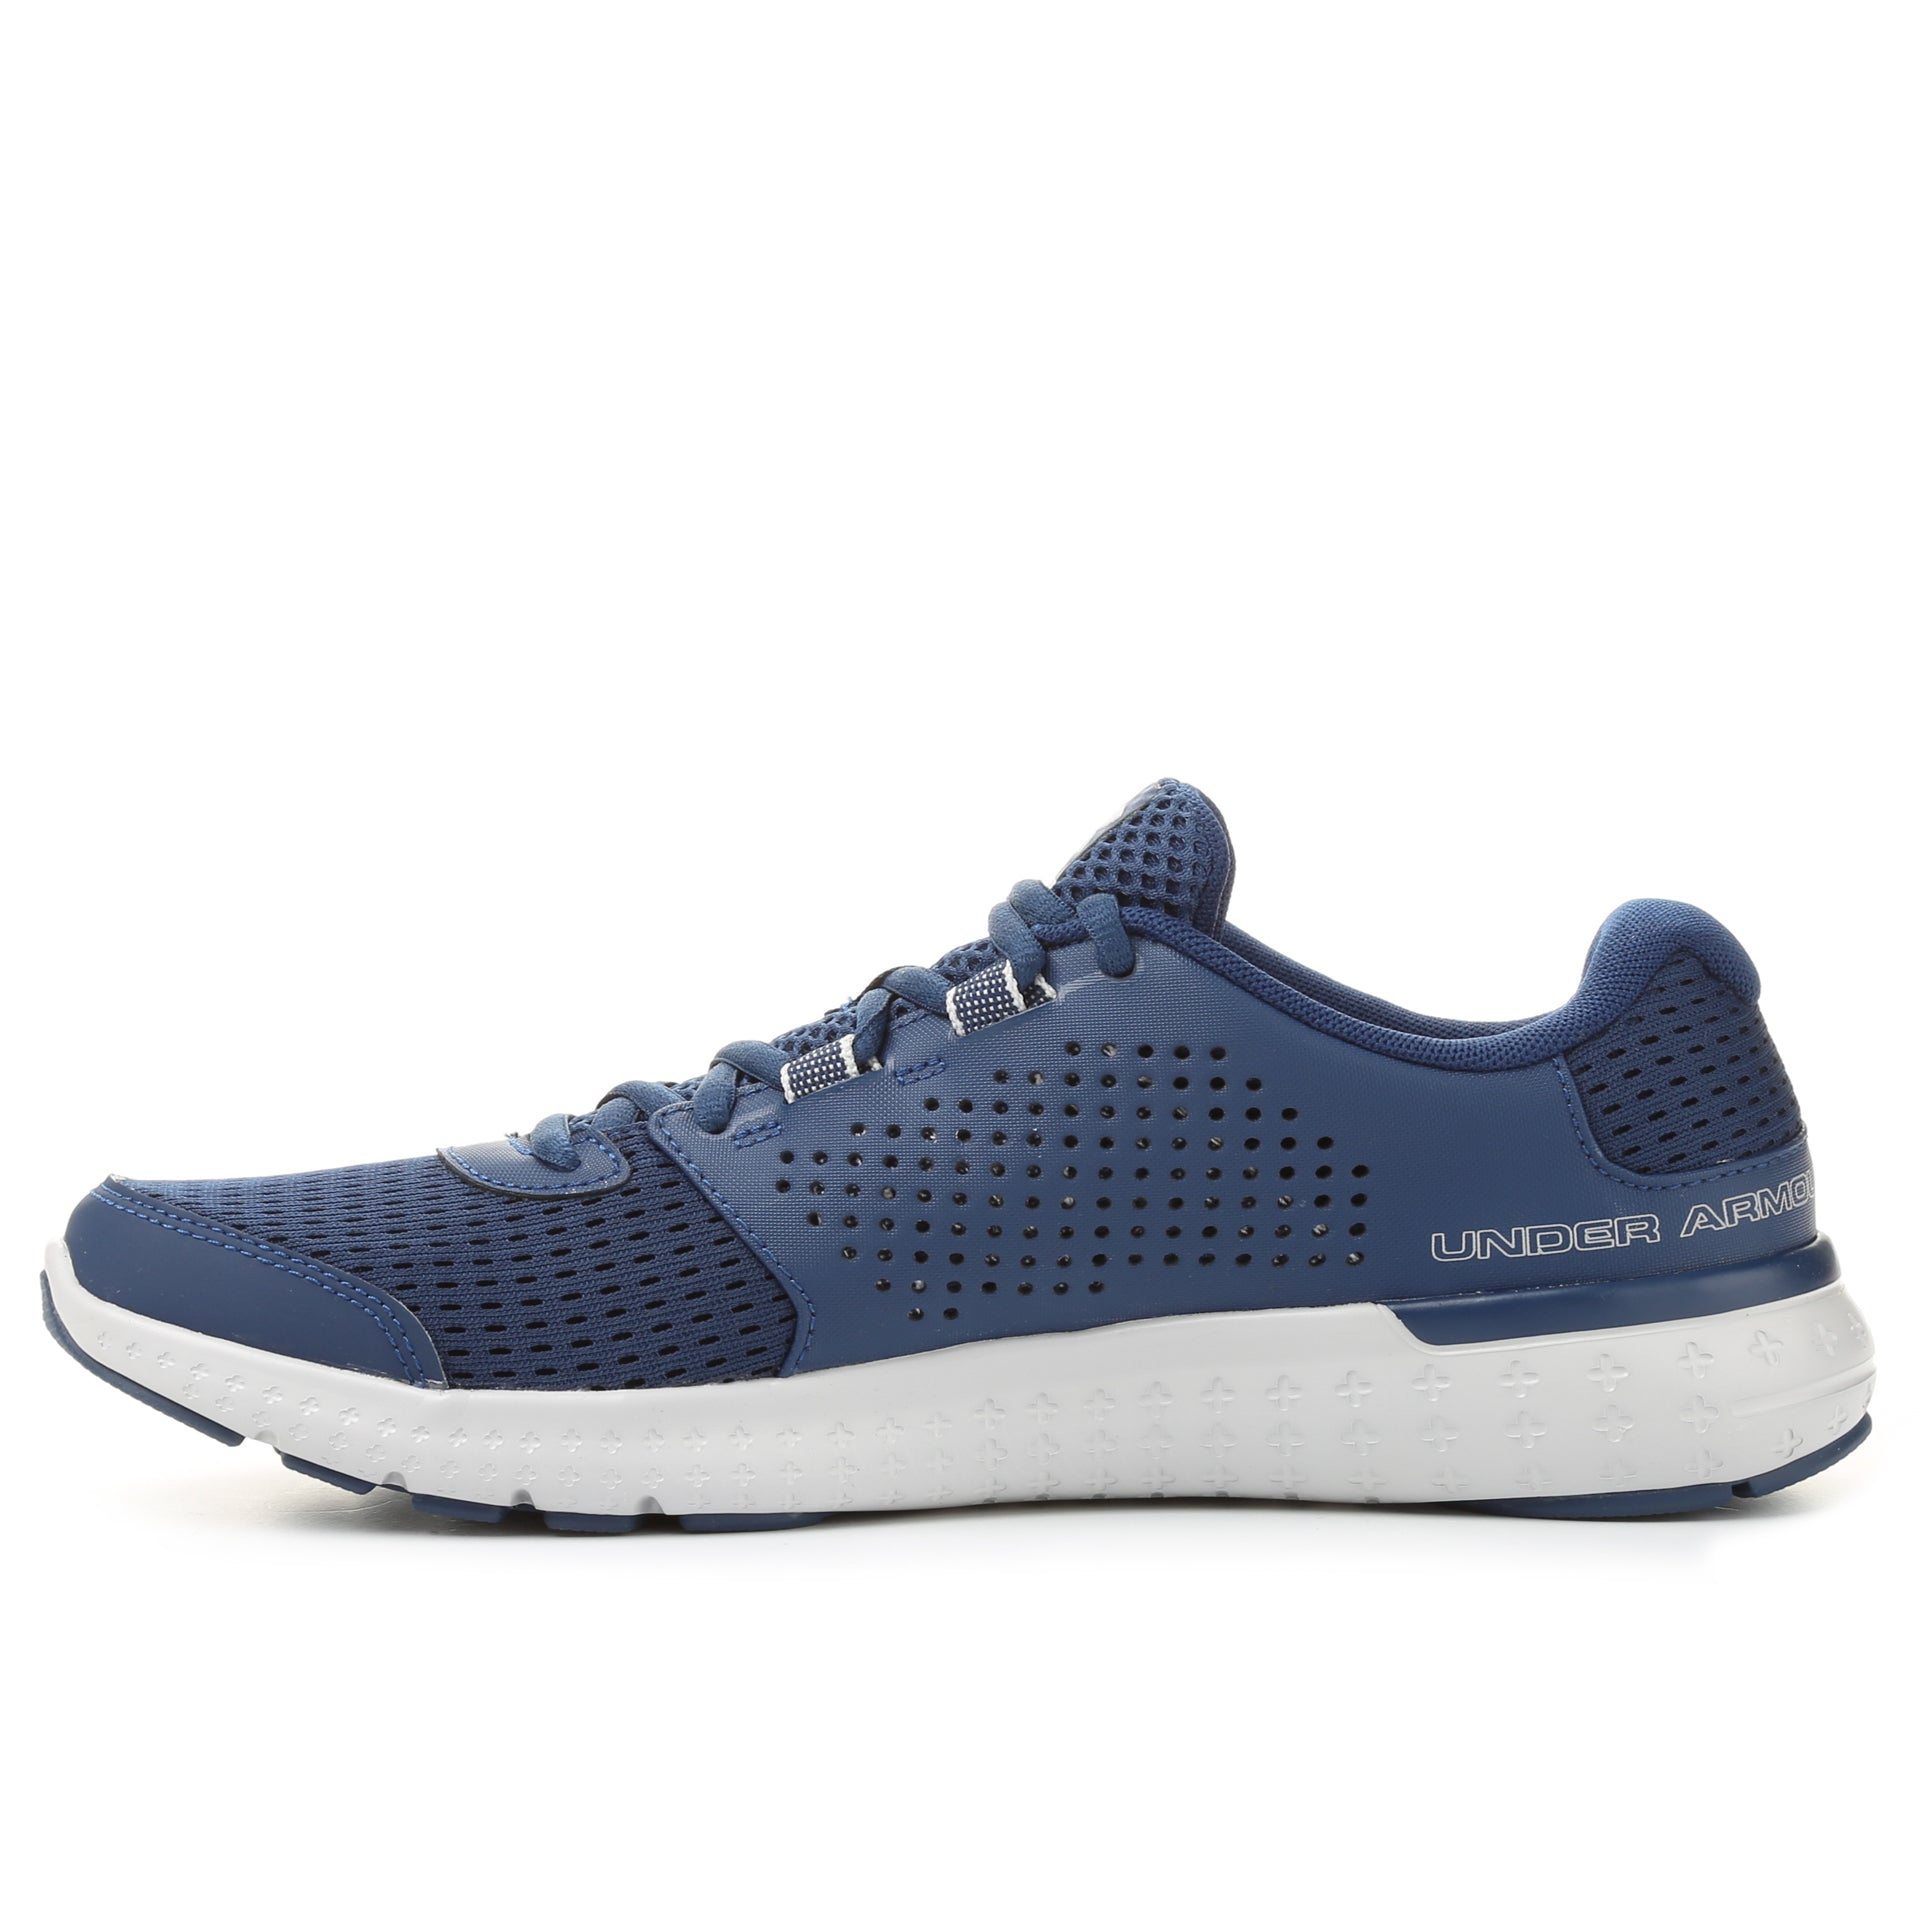 Under Armour Micro G Fuel Shoes- Blackout Navy/Glacier Grey/Me - New Star